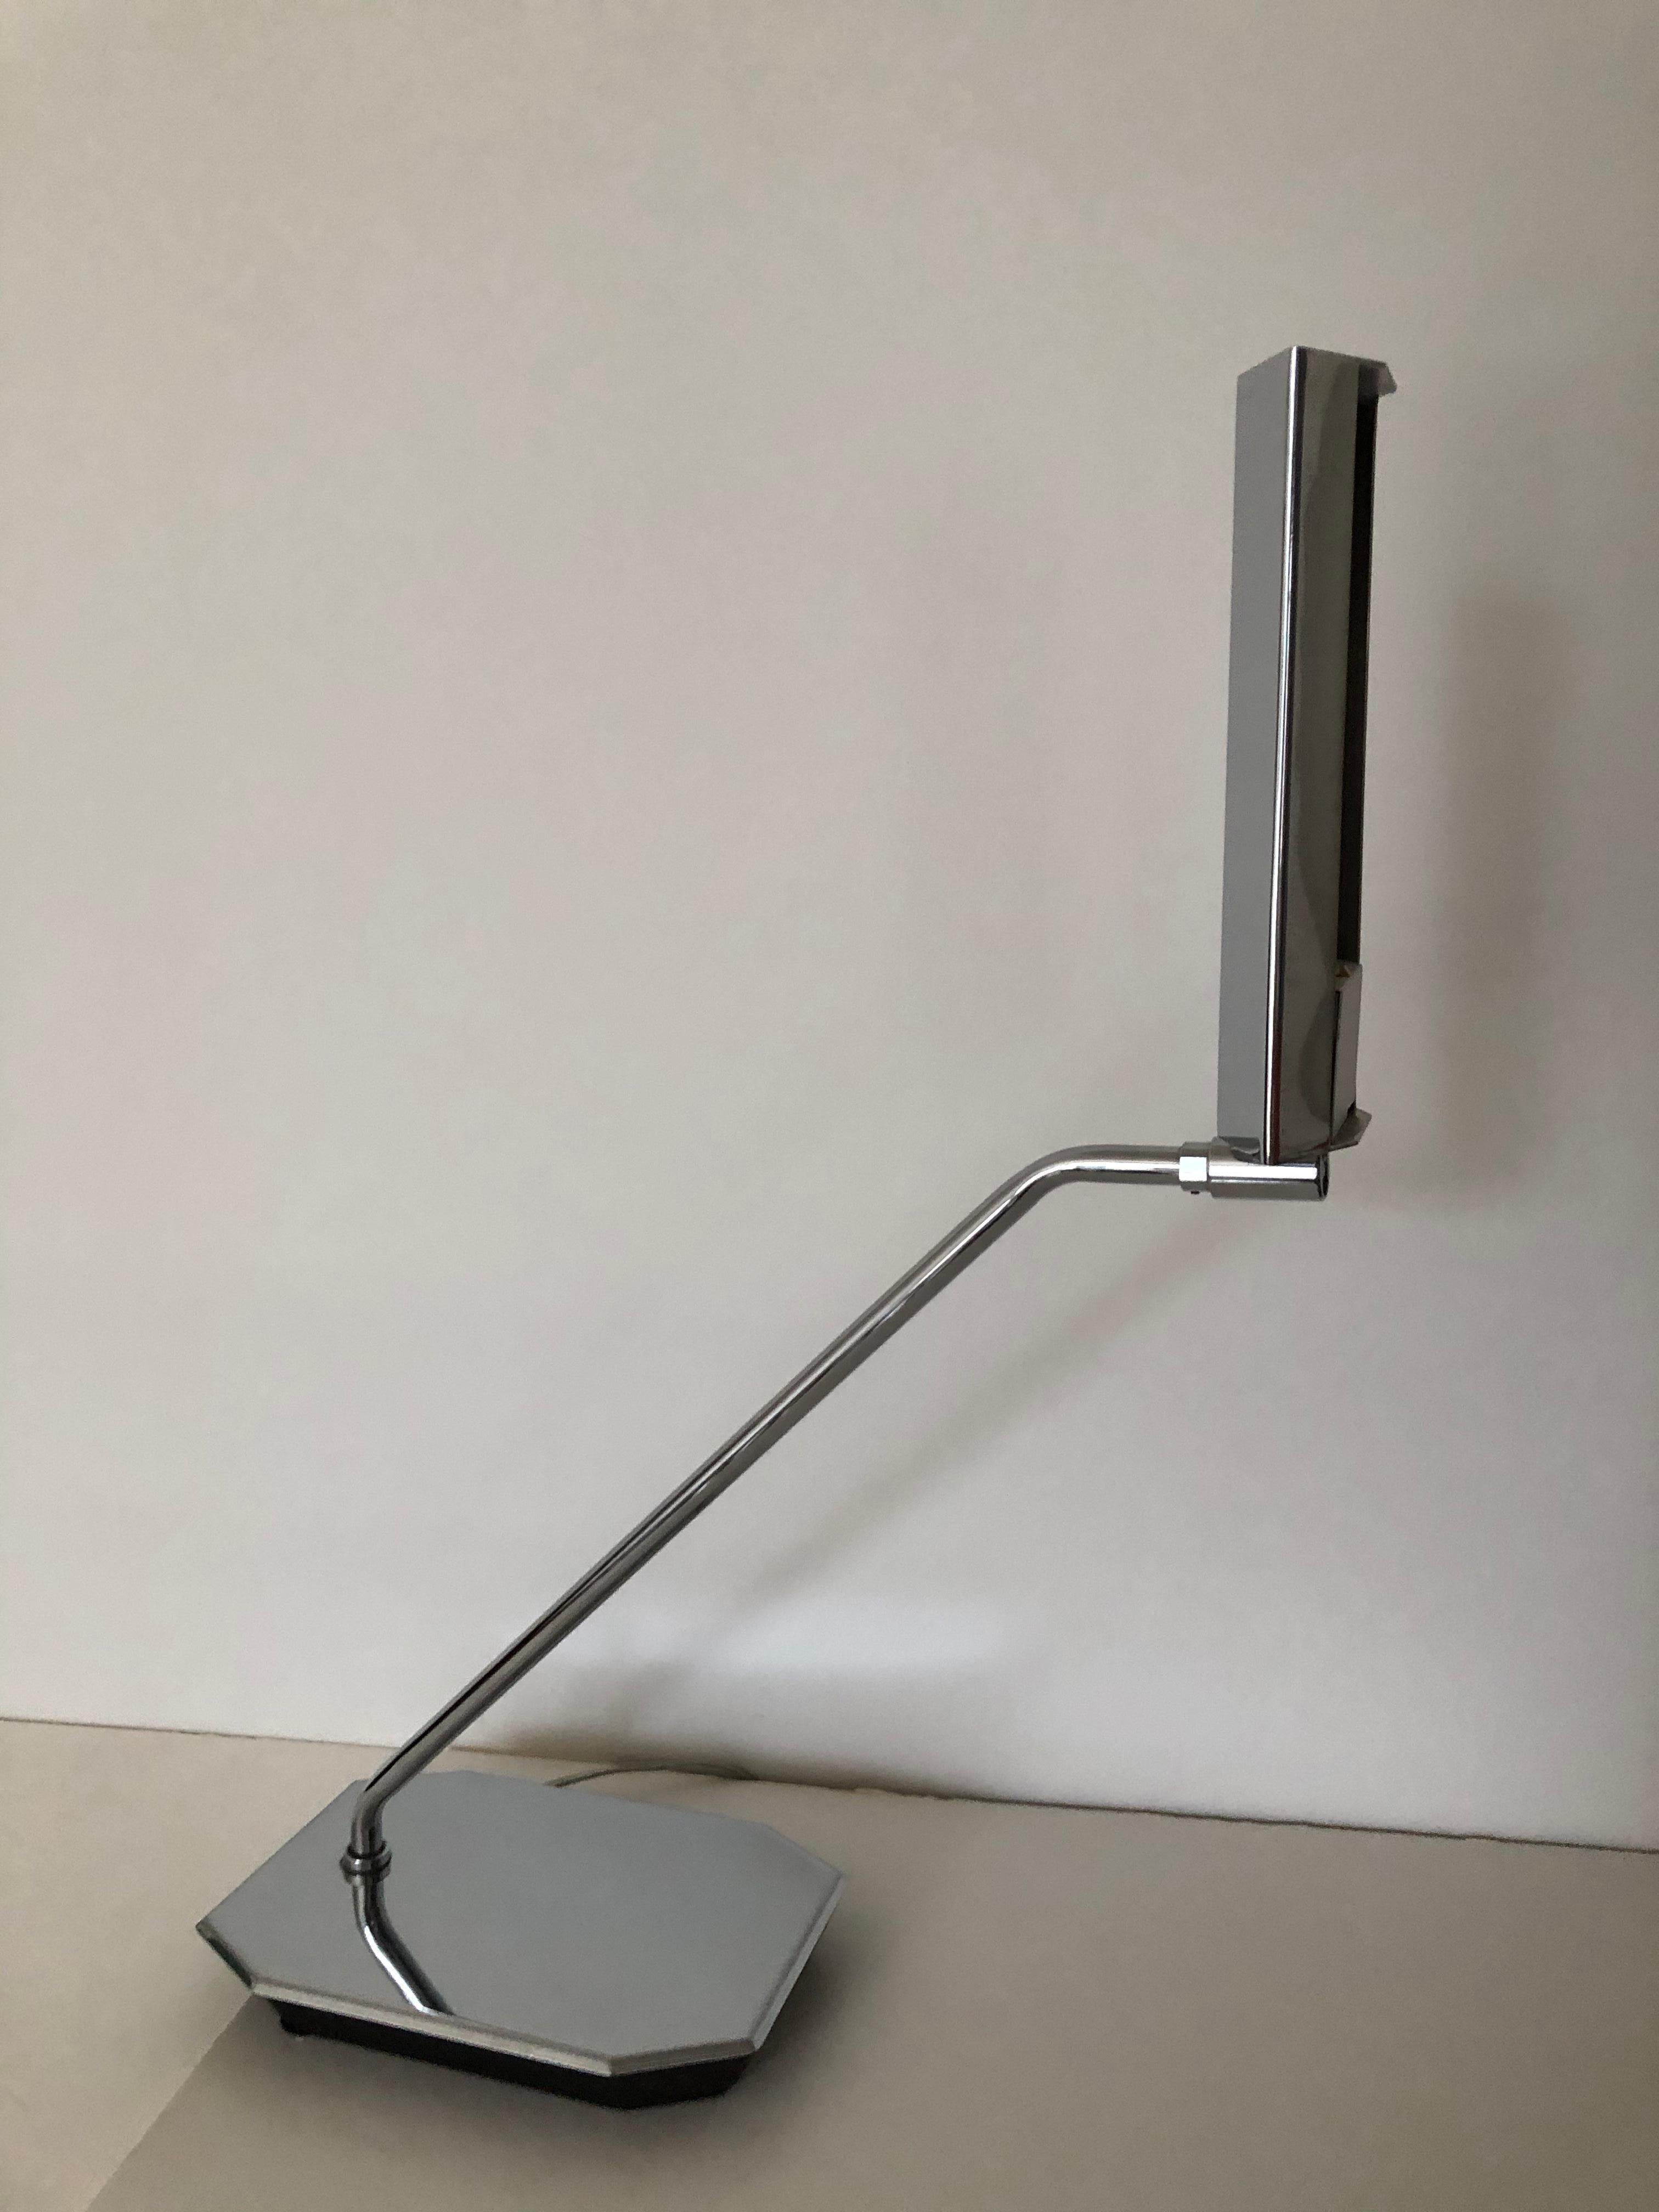 Pair of Koch & Lowy Chrome Swing Arm Adjustable Desk / Lamps In Excellent Condition For Sale In Westport, CT